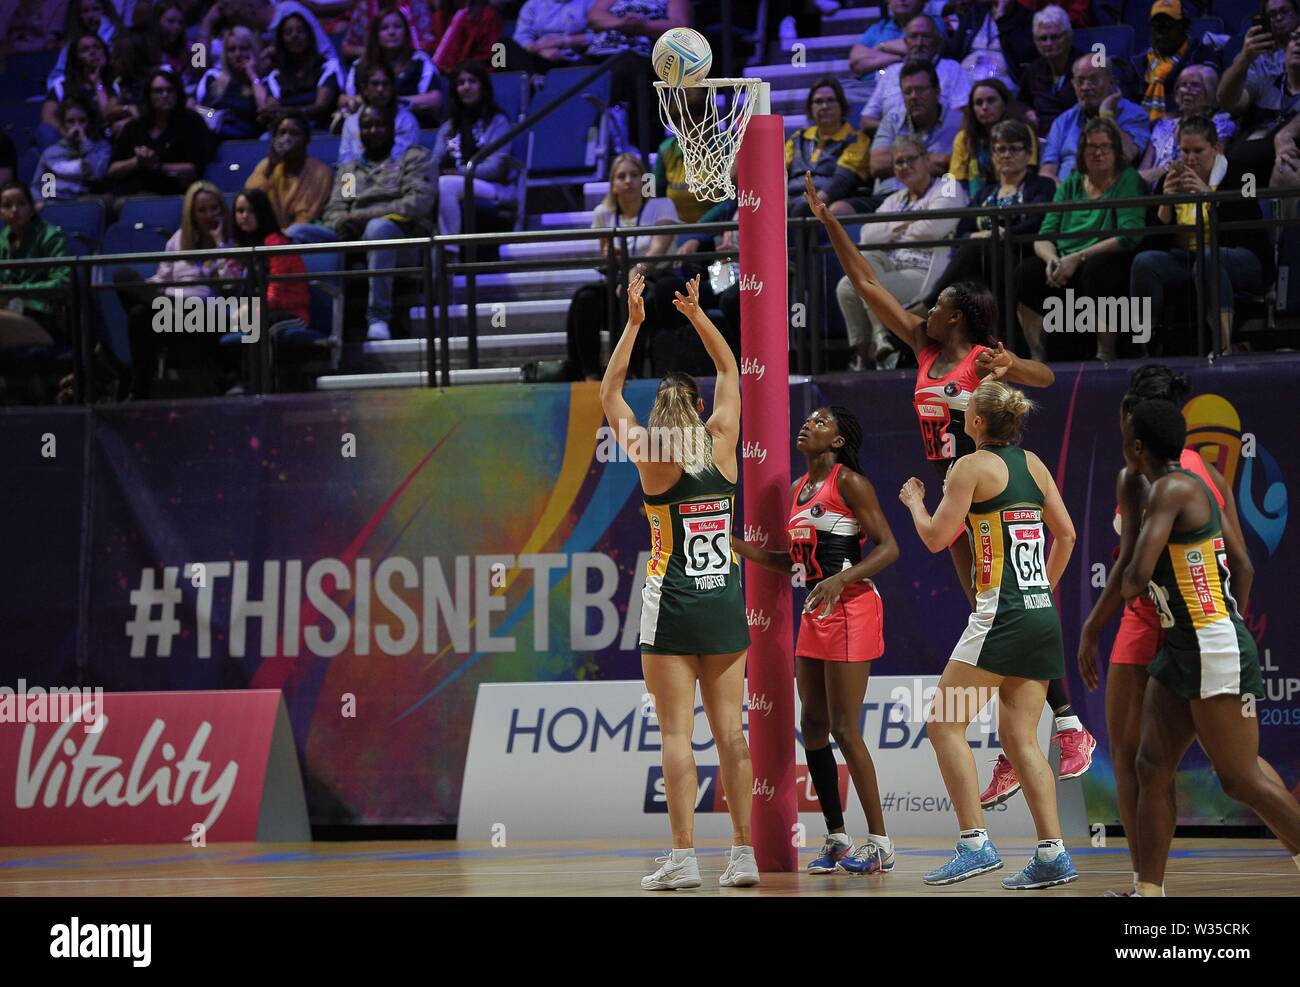 Liverpool. United Kingdom. 12 July 2019. Lenize Potgieter (South Africa) scores during the Preliminary game between South Africa and Trinidad and Tobago at the Netball World Cup. M and S arena, Liverpool. Merseyside. UK. Credit Garry Bowdenh/SIP photo agency/Alamy live news. Stock Photo